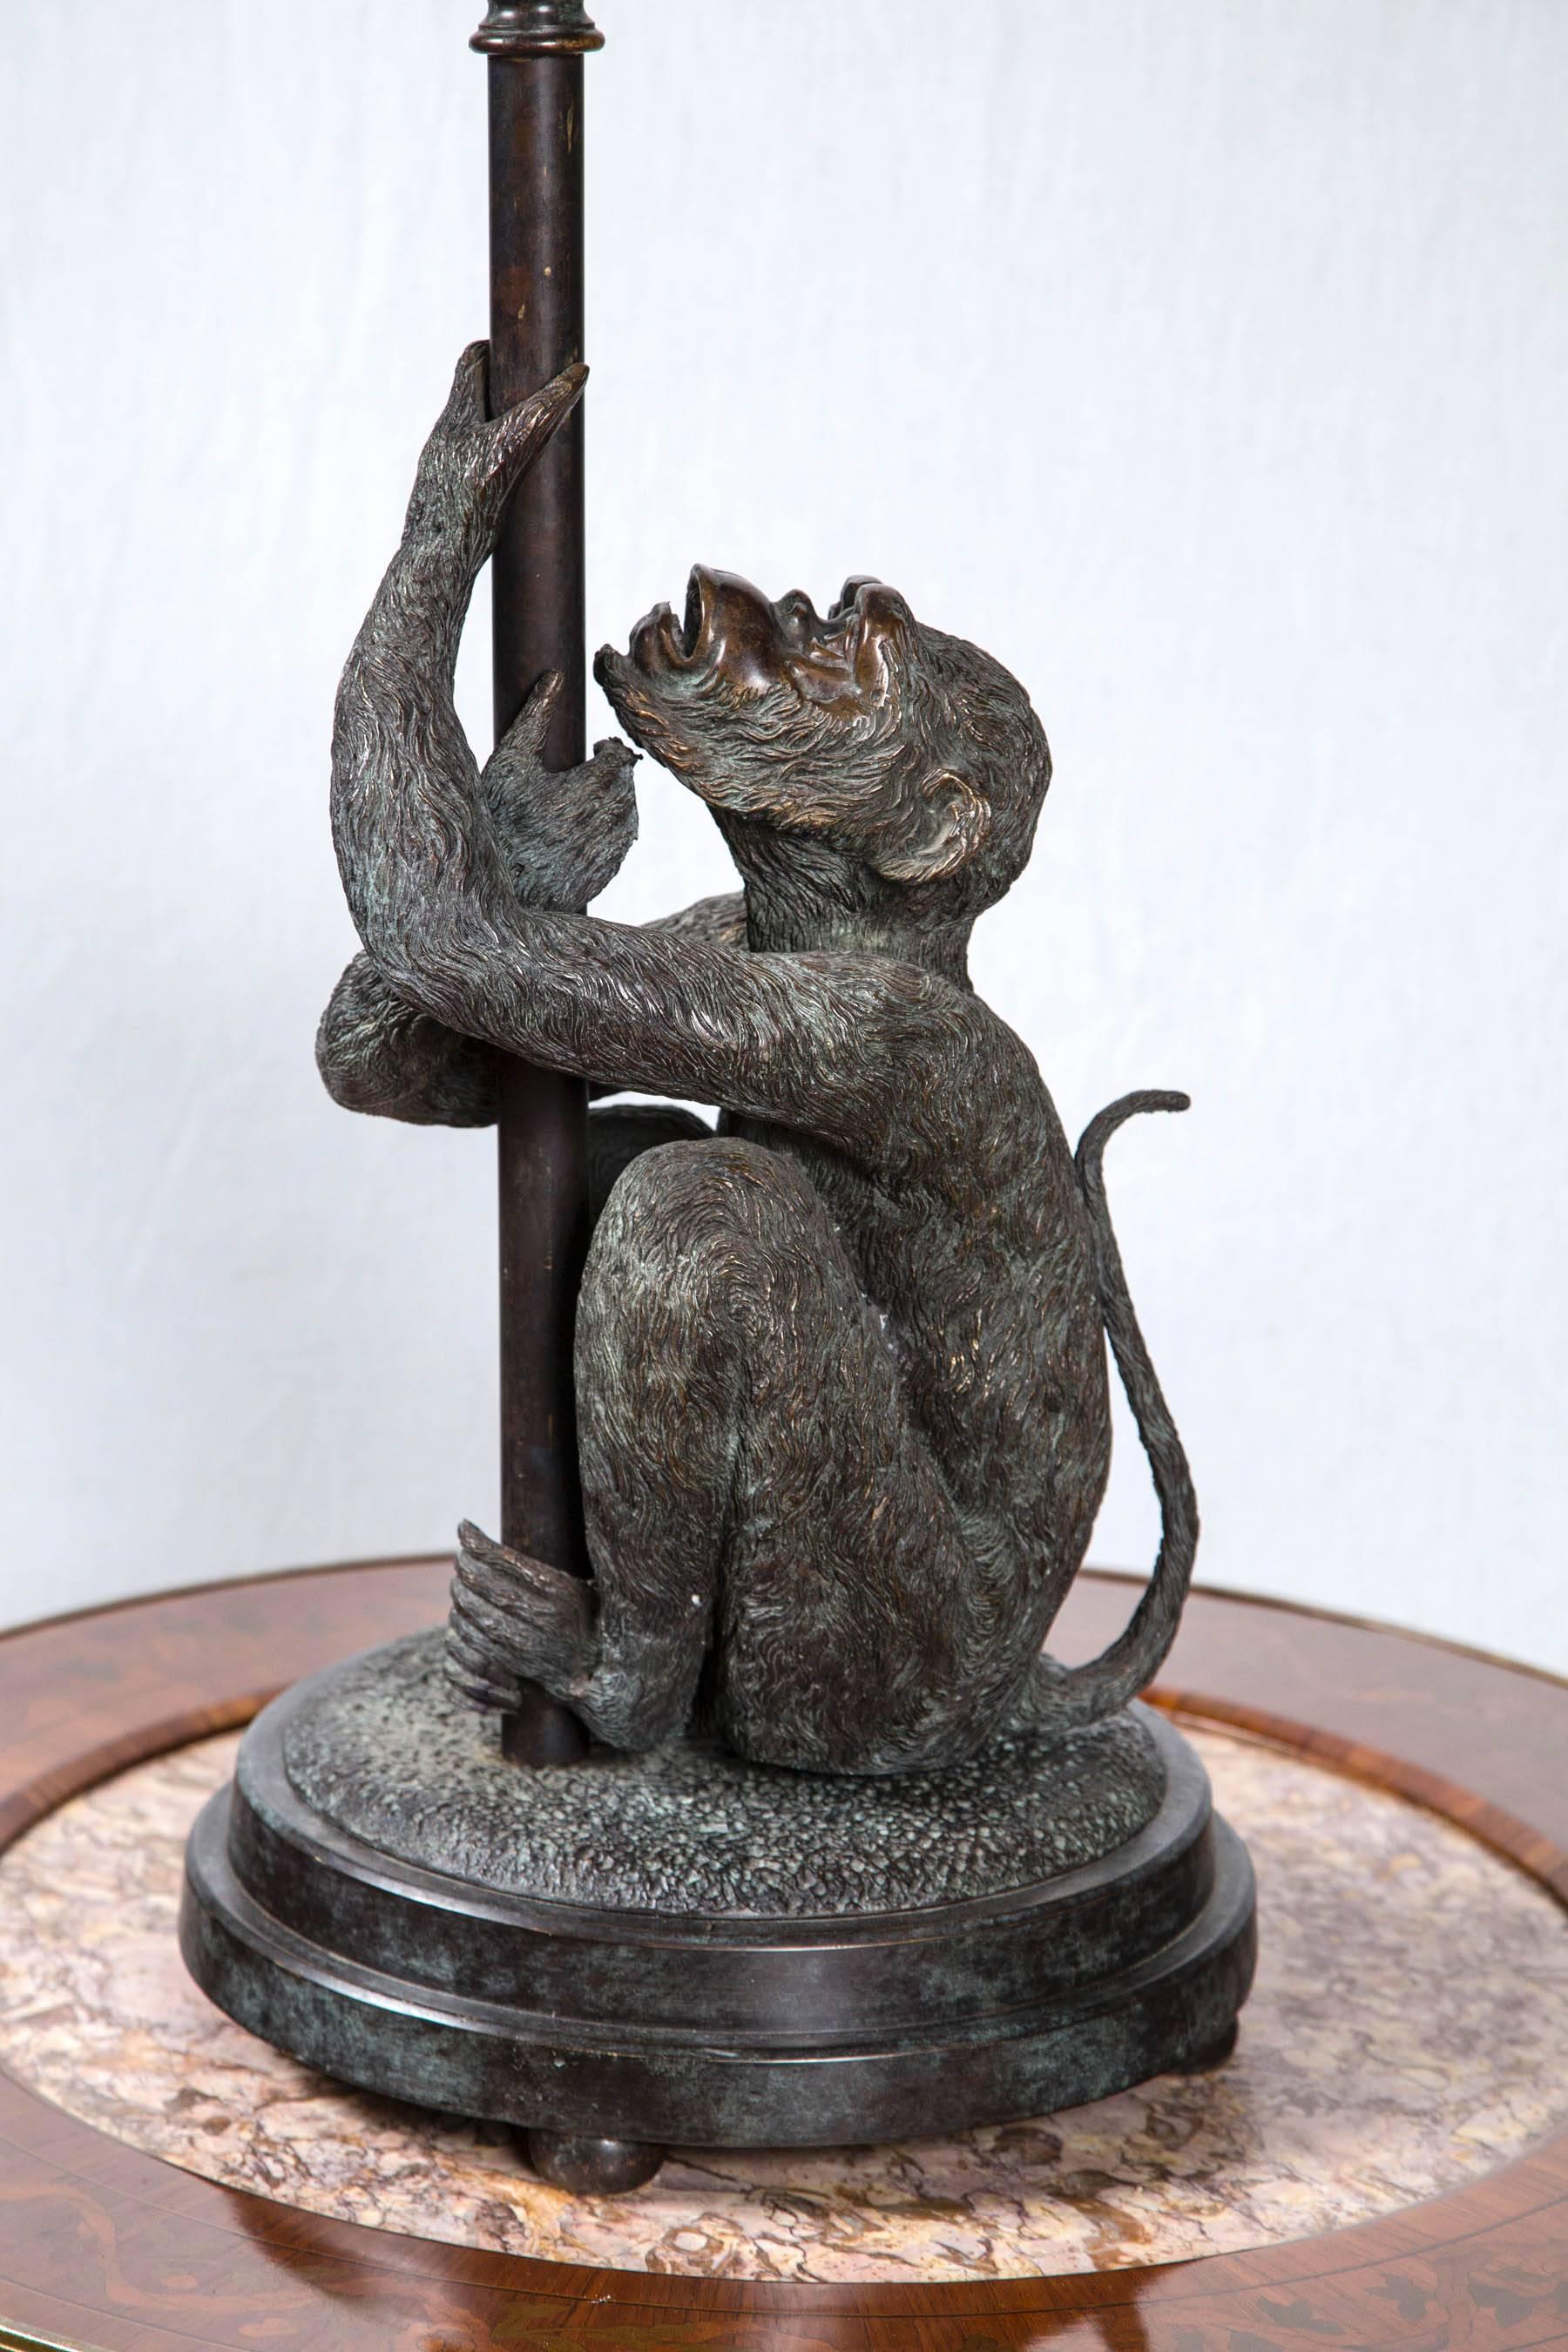 Raised on four half ball feet below circular bases, these naturalistic bronze monkeys are well chased and chiseled with a deep brown/golden patina.
They each have their arms wrapped around a pole as they sit on a rough outcropping. The pole has an